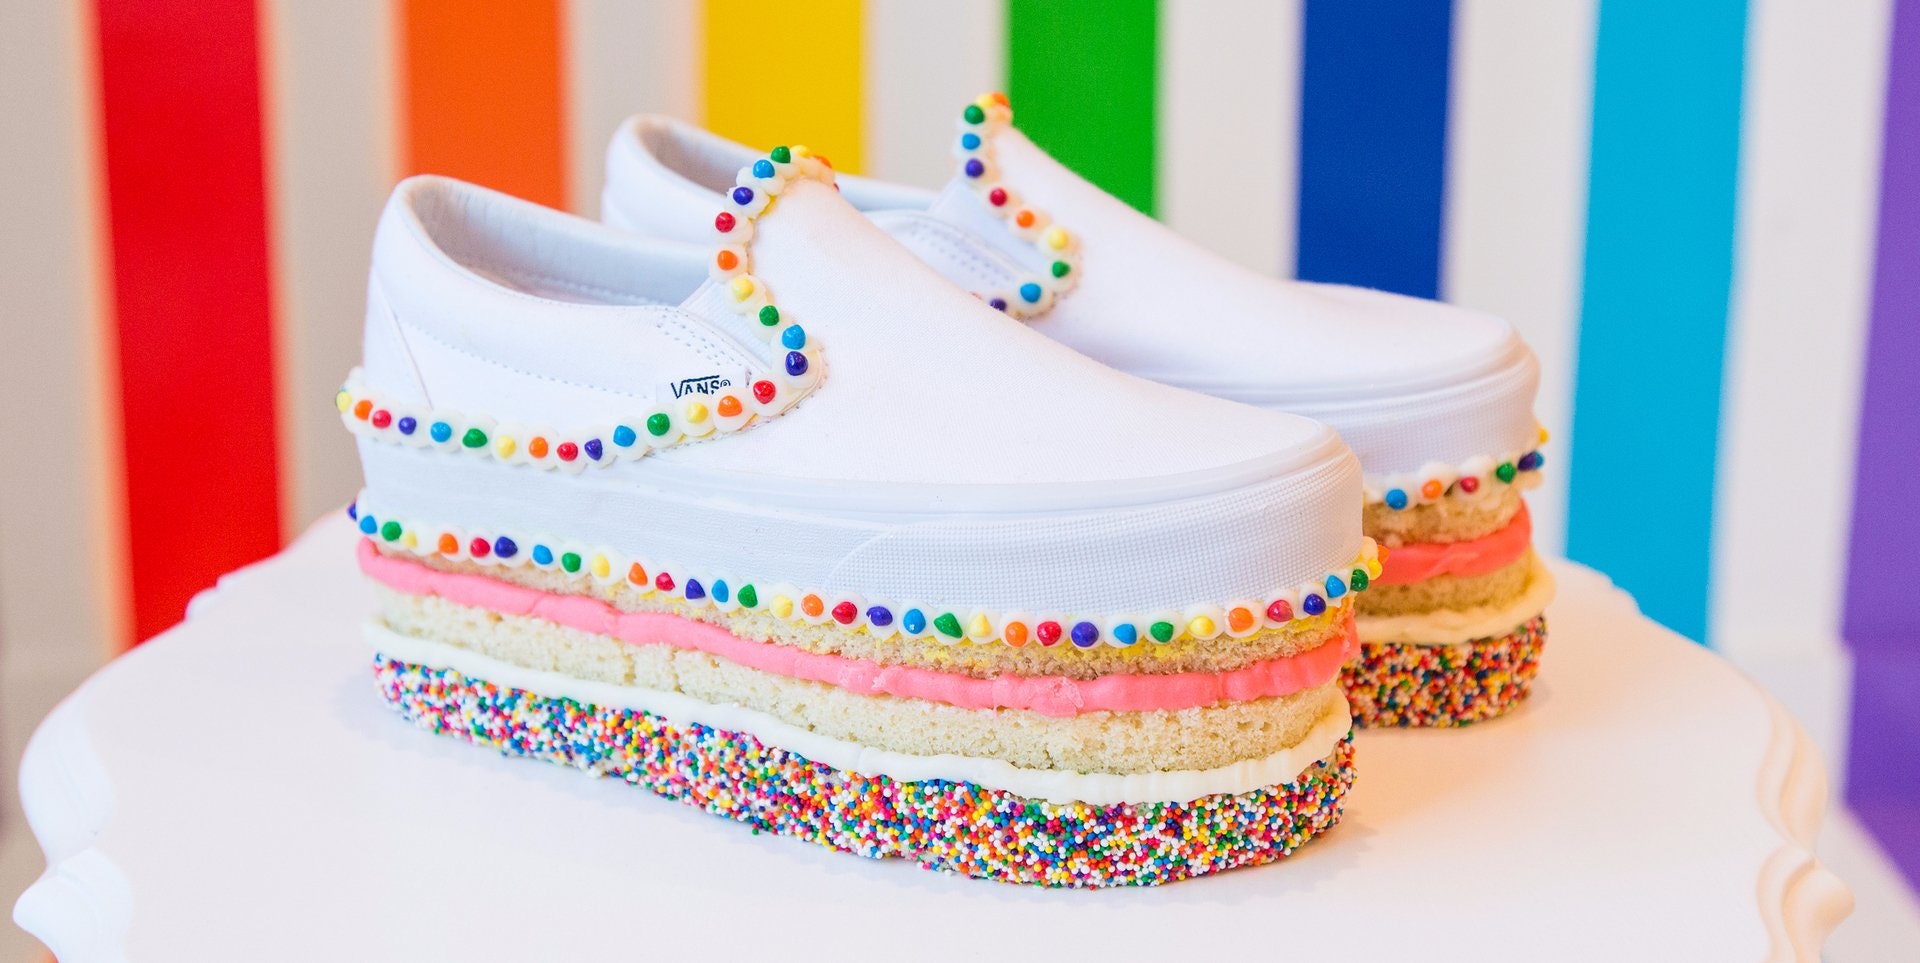 vans off the wall cake